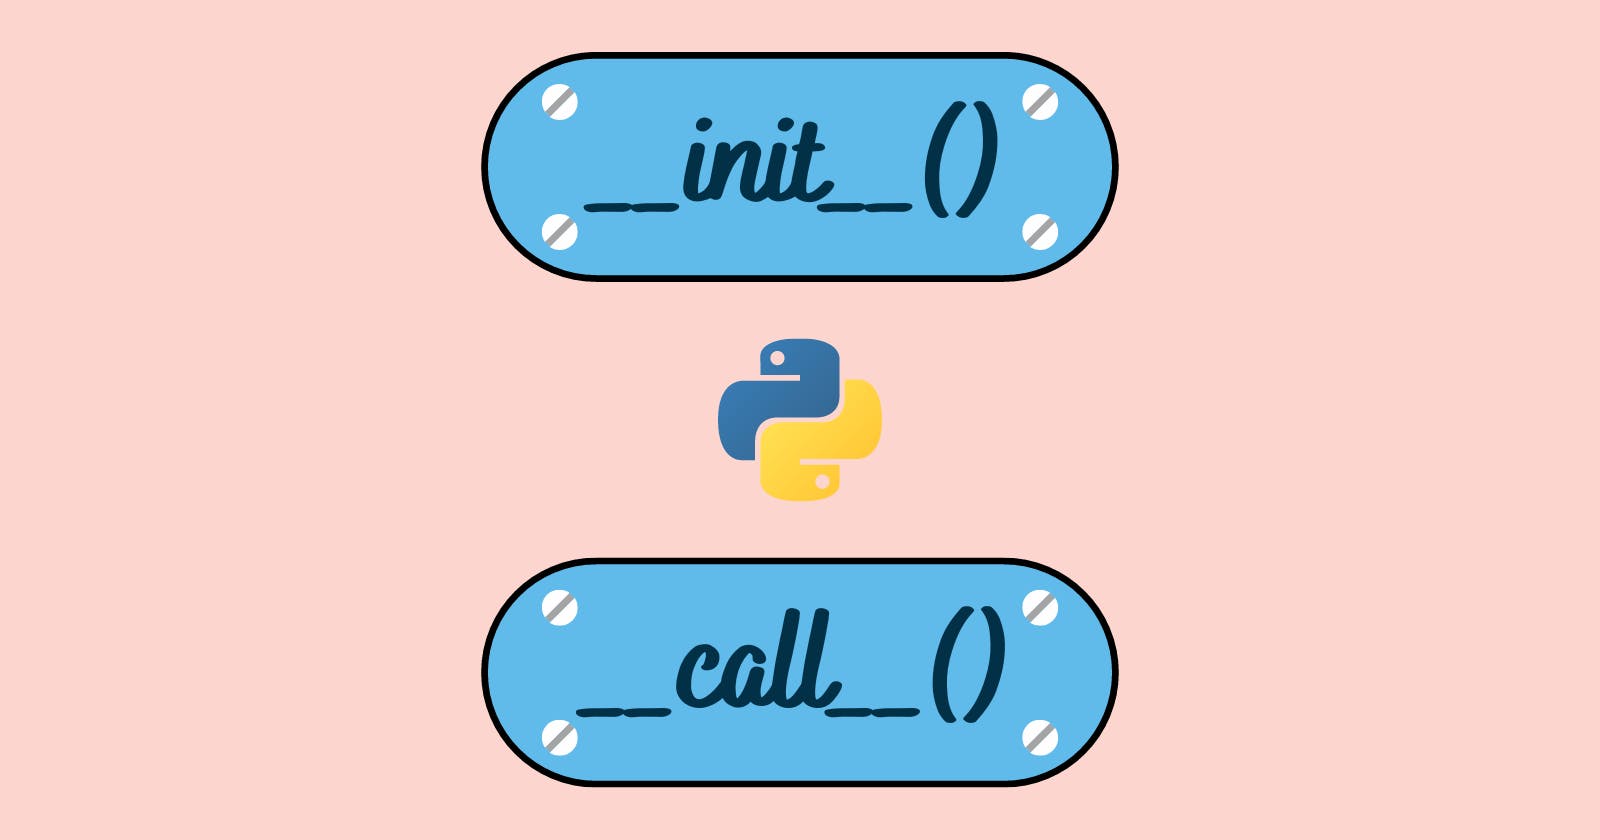 __init__ and __call__ In Python - What Do They Do?